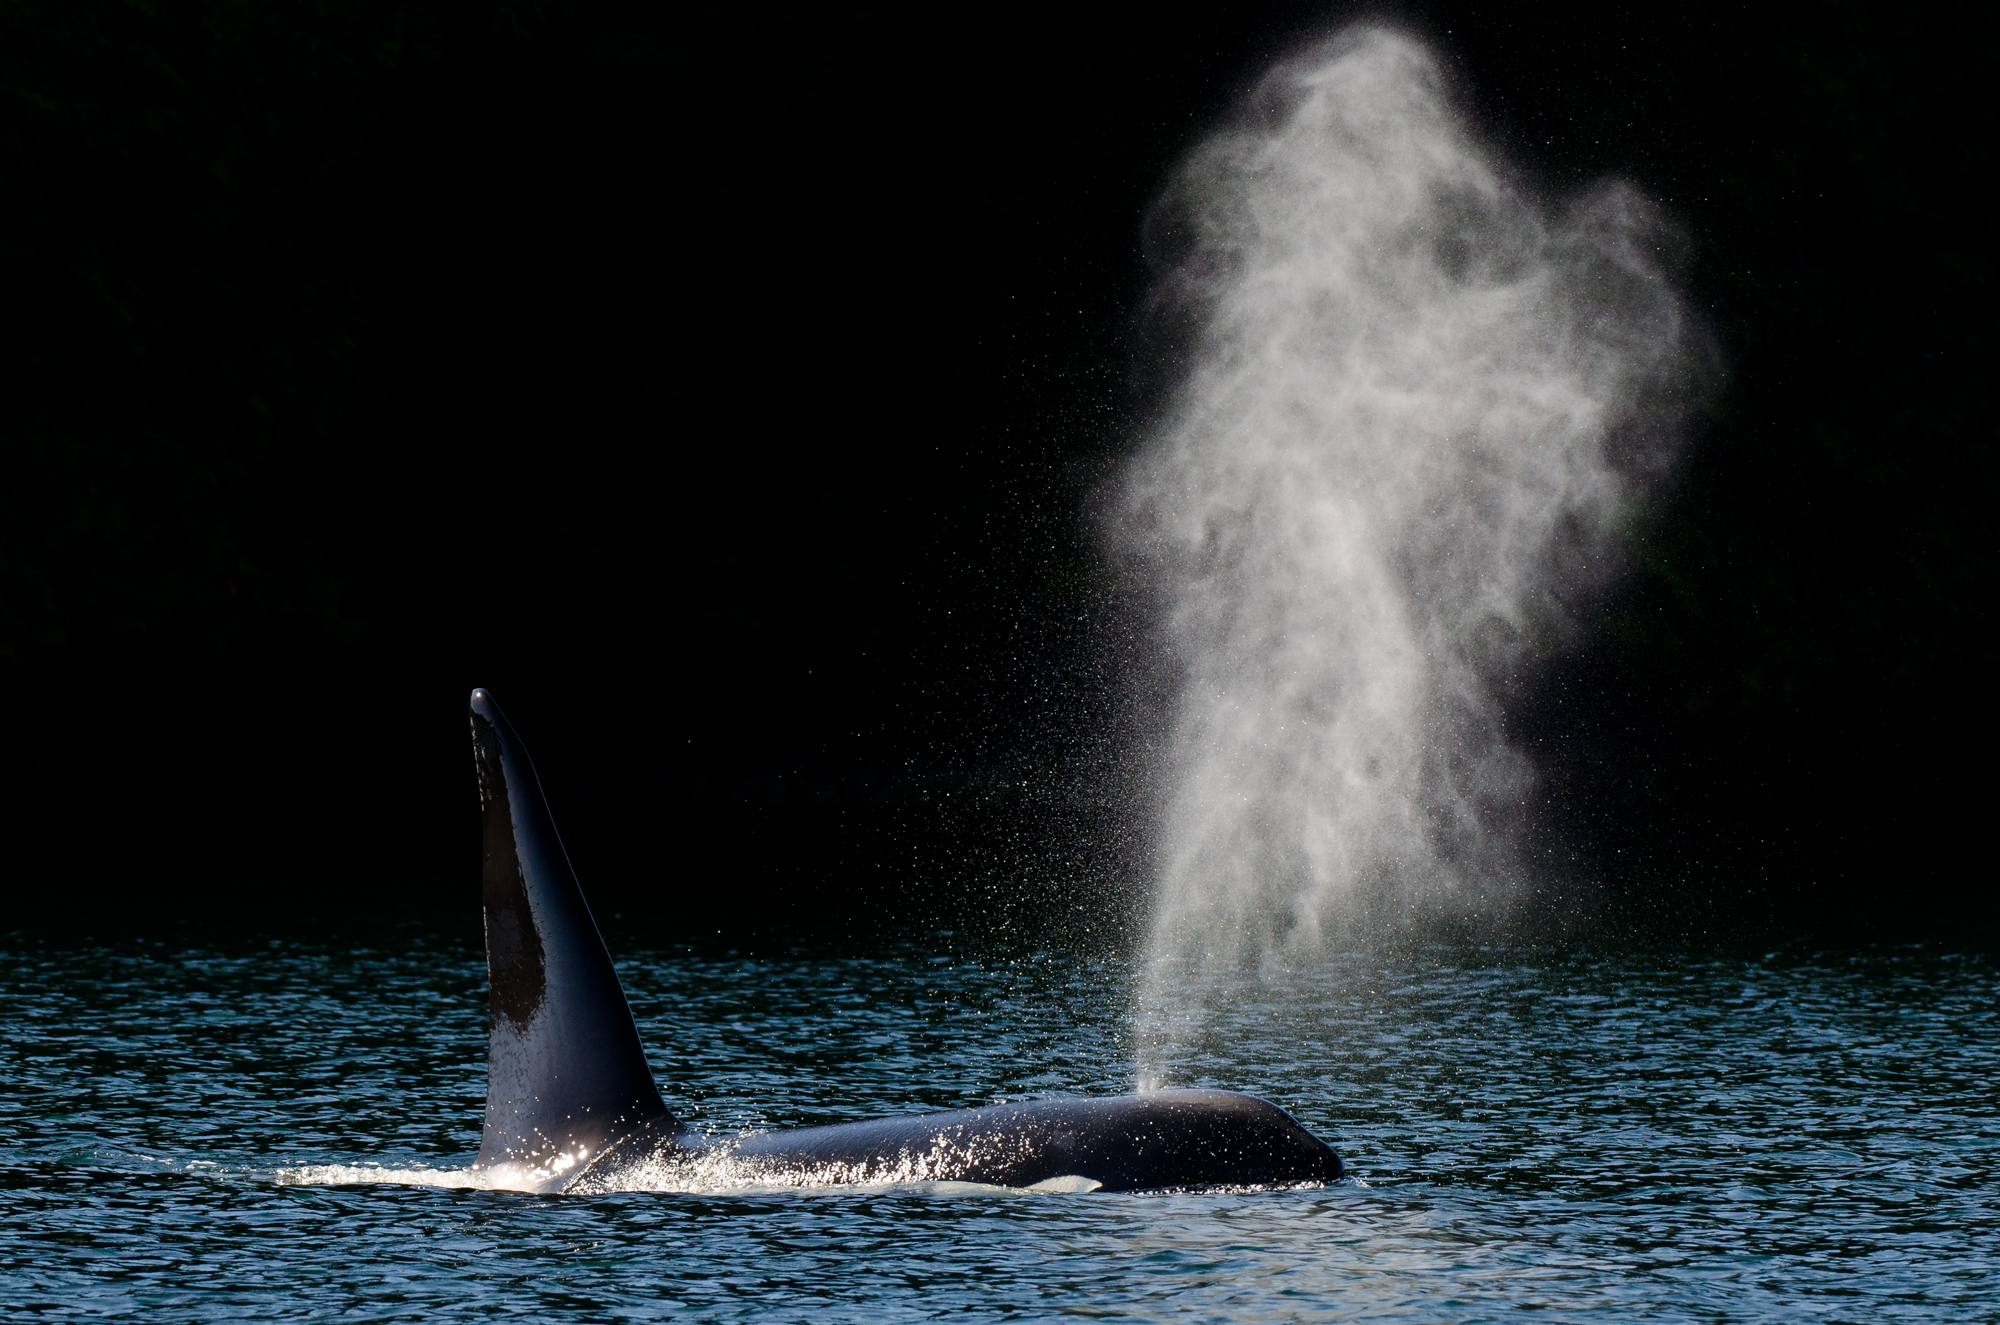  A bull orca, distinguishable by its enormous dorsal fin, exhales at the surface. 